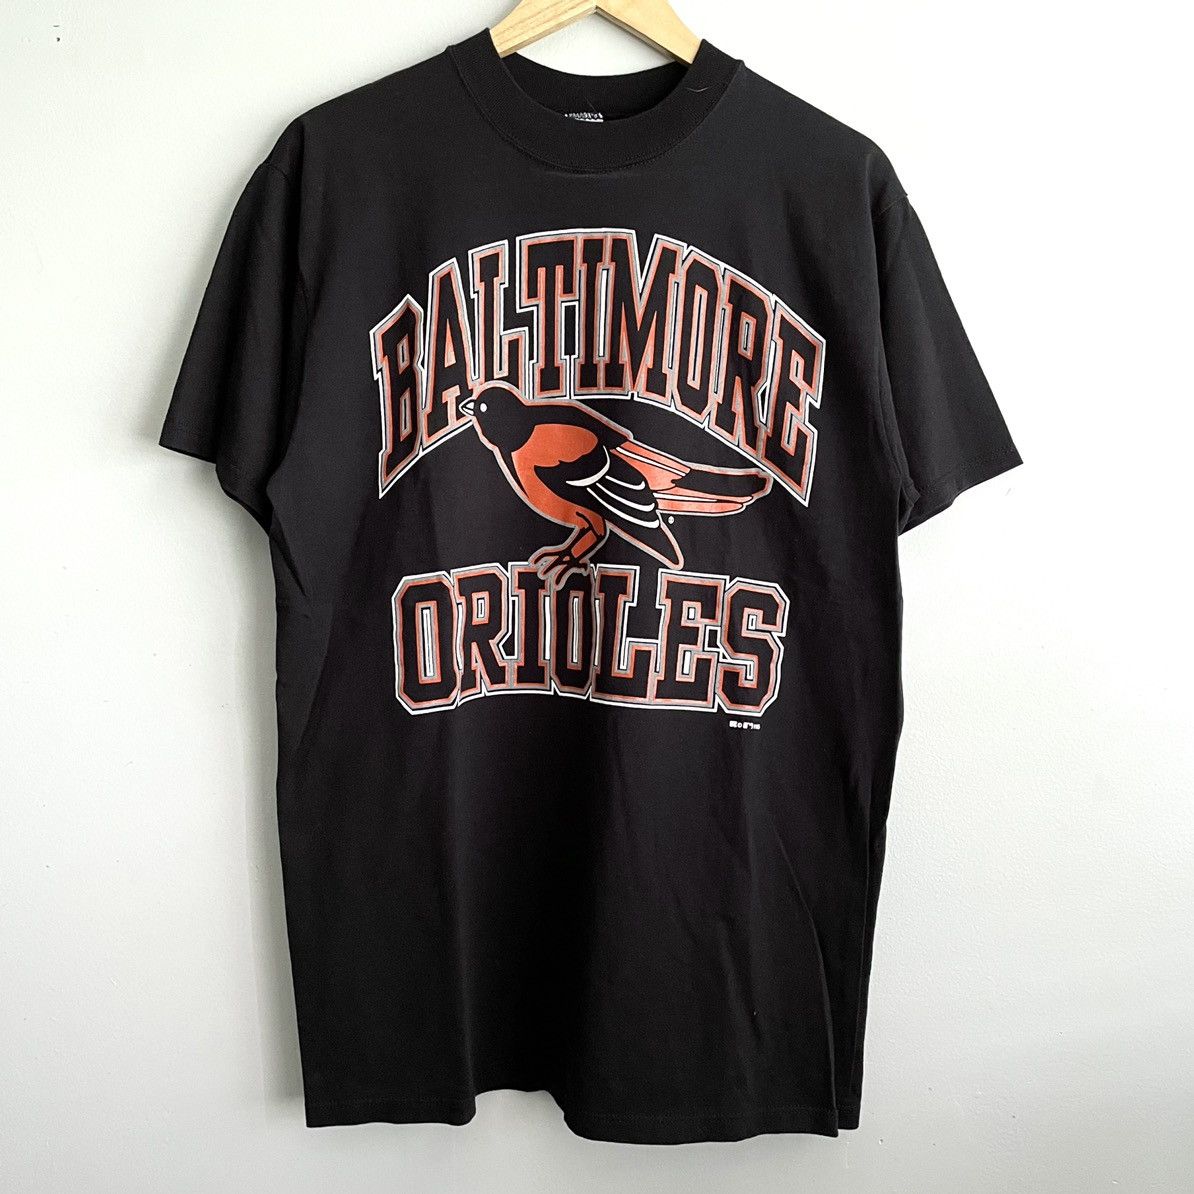 BALTIMORE ORIOLES VINTAGE 1995 RUSSELL ATHLETIC T-SHIRT ADULT LARGE